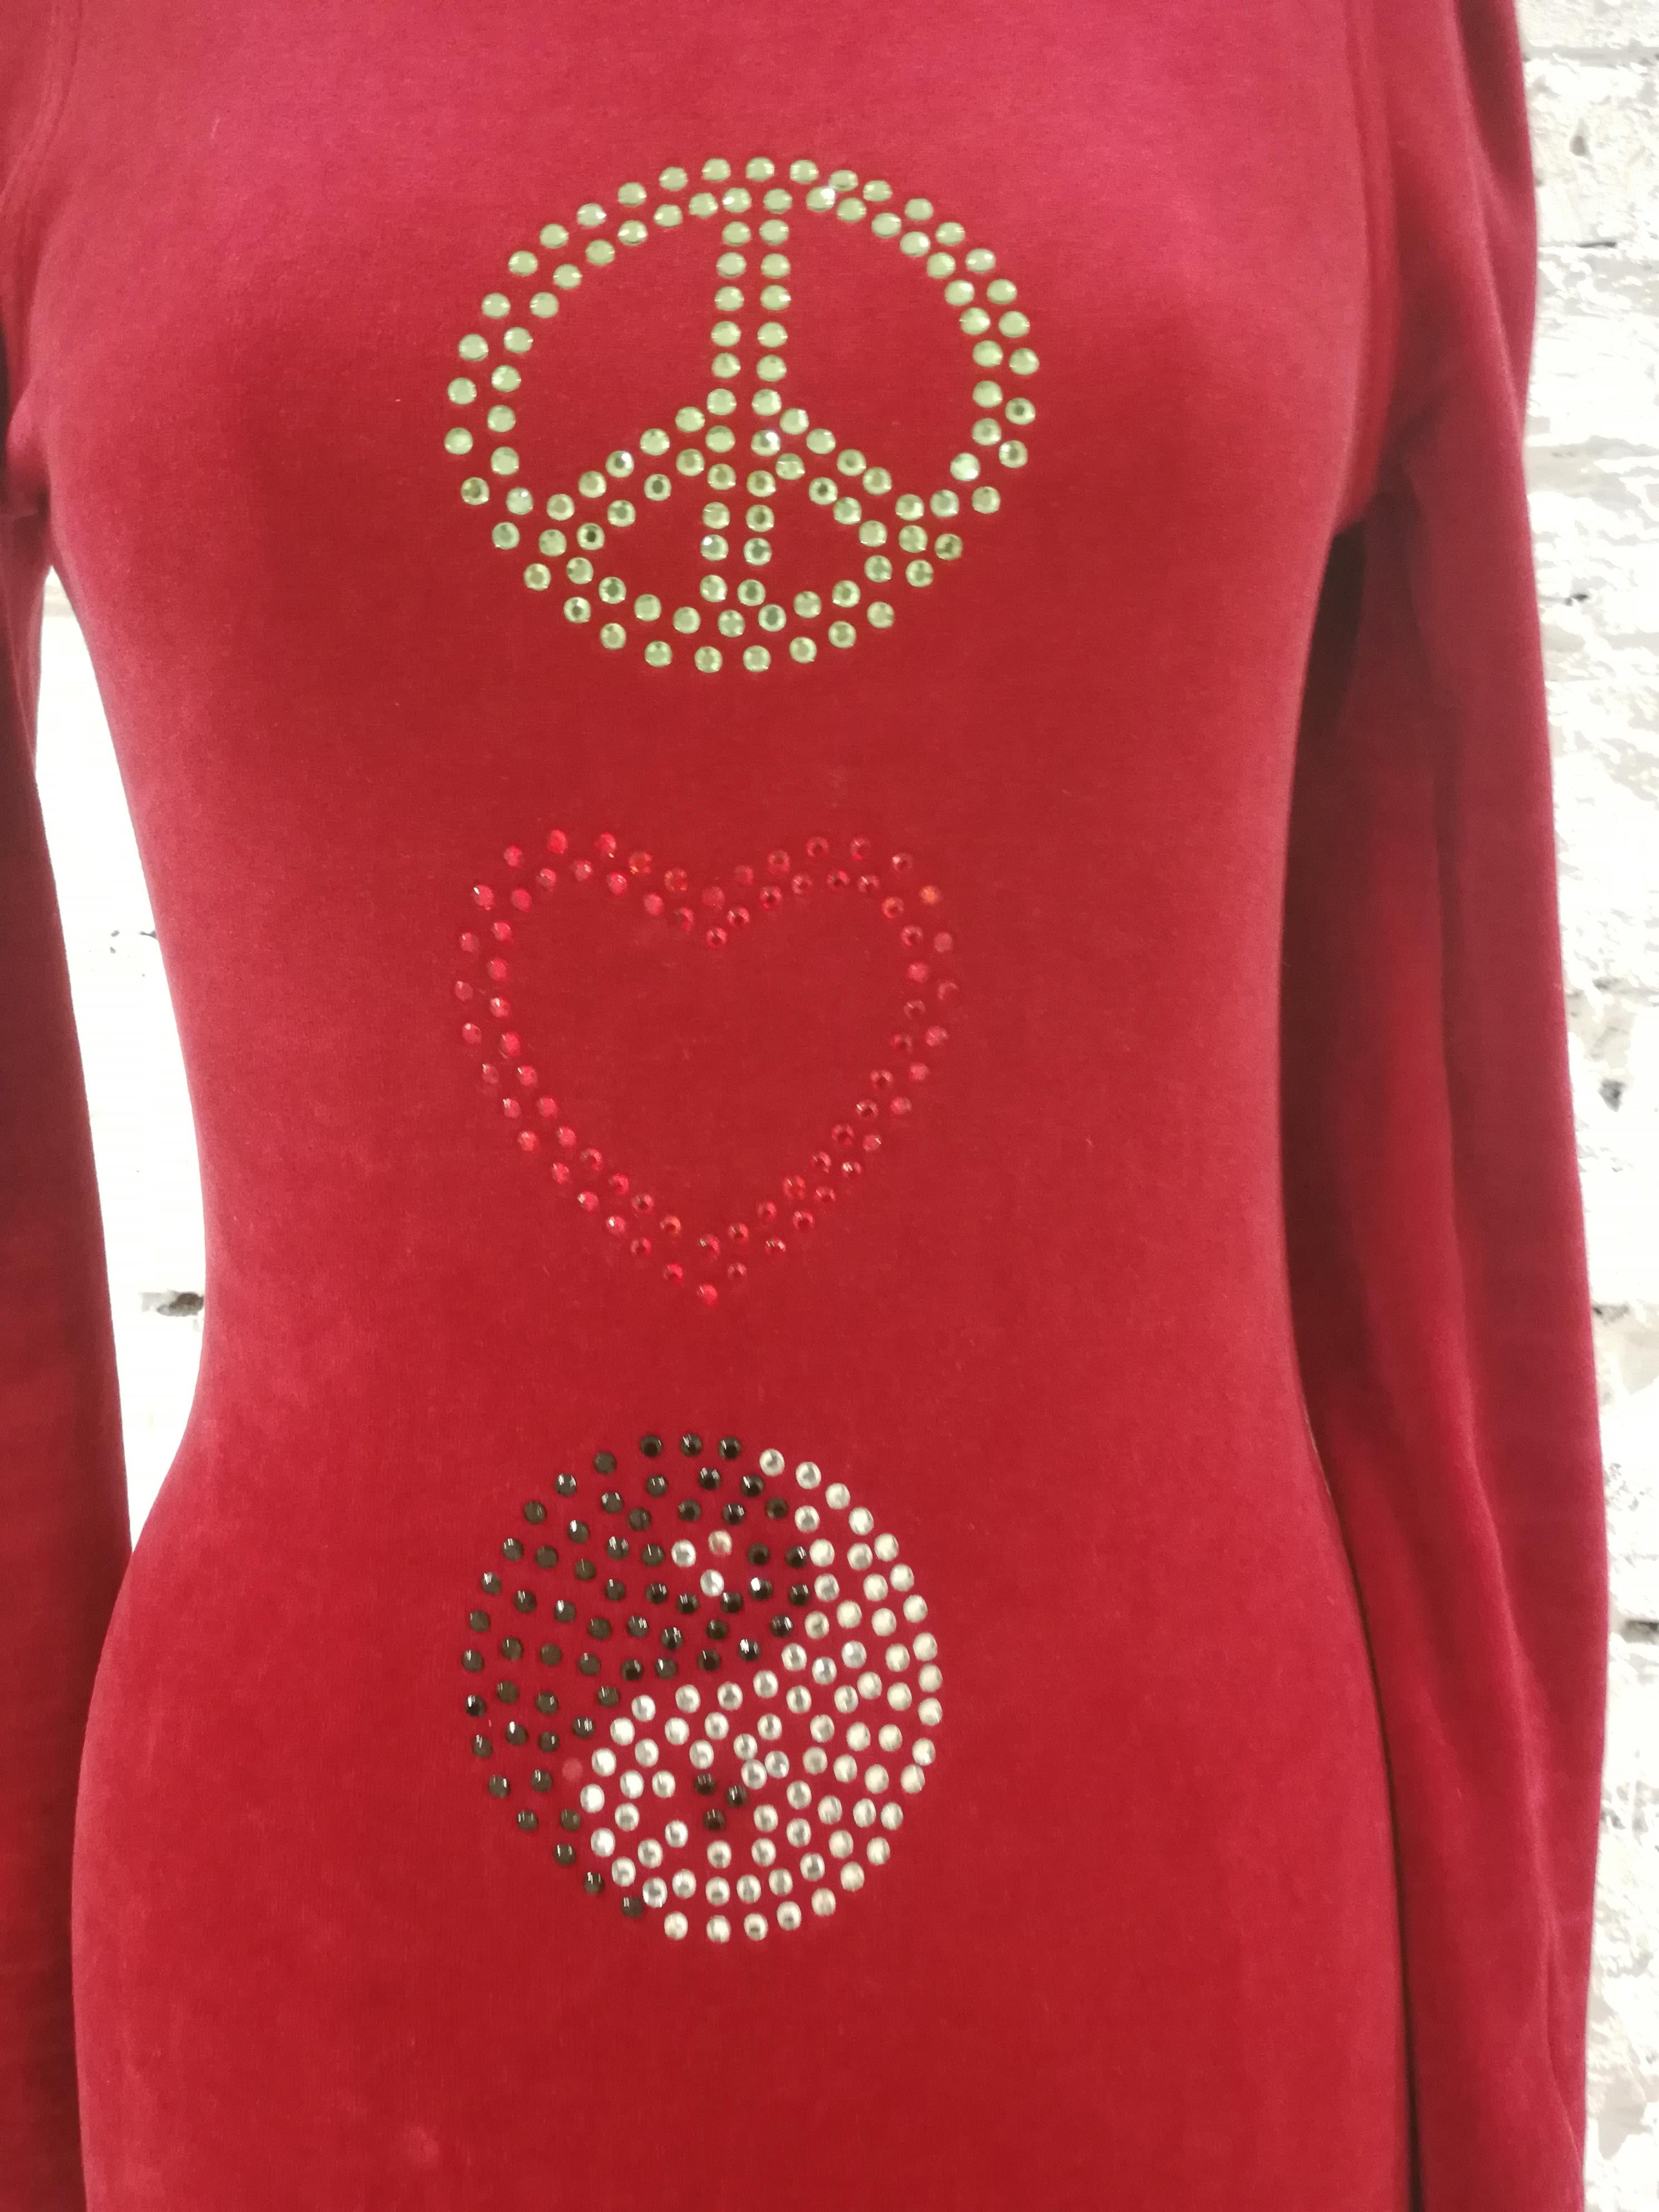 Moschino Red Velvet Peace Dress
Velver red dress totally made in italy in size 46